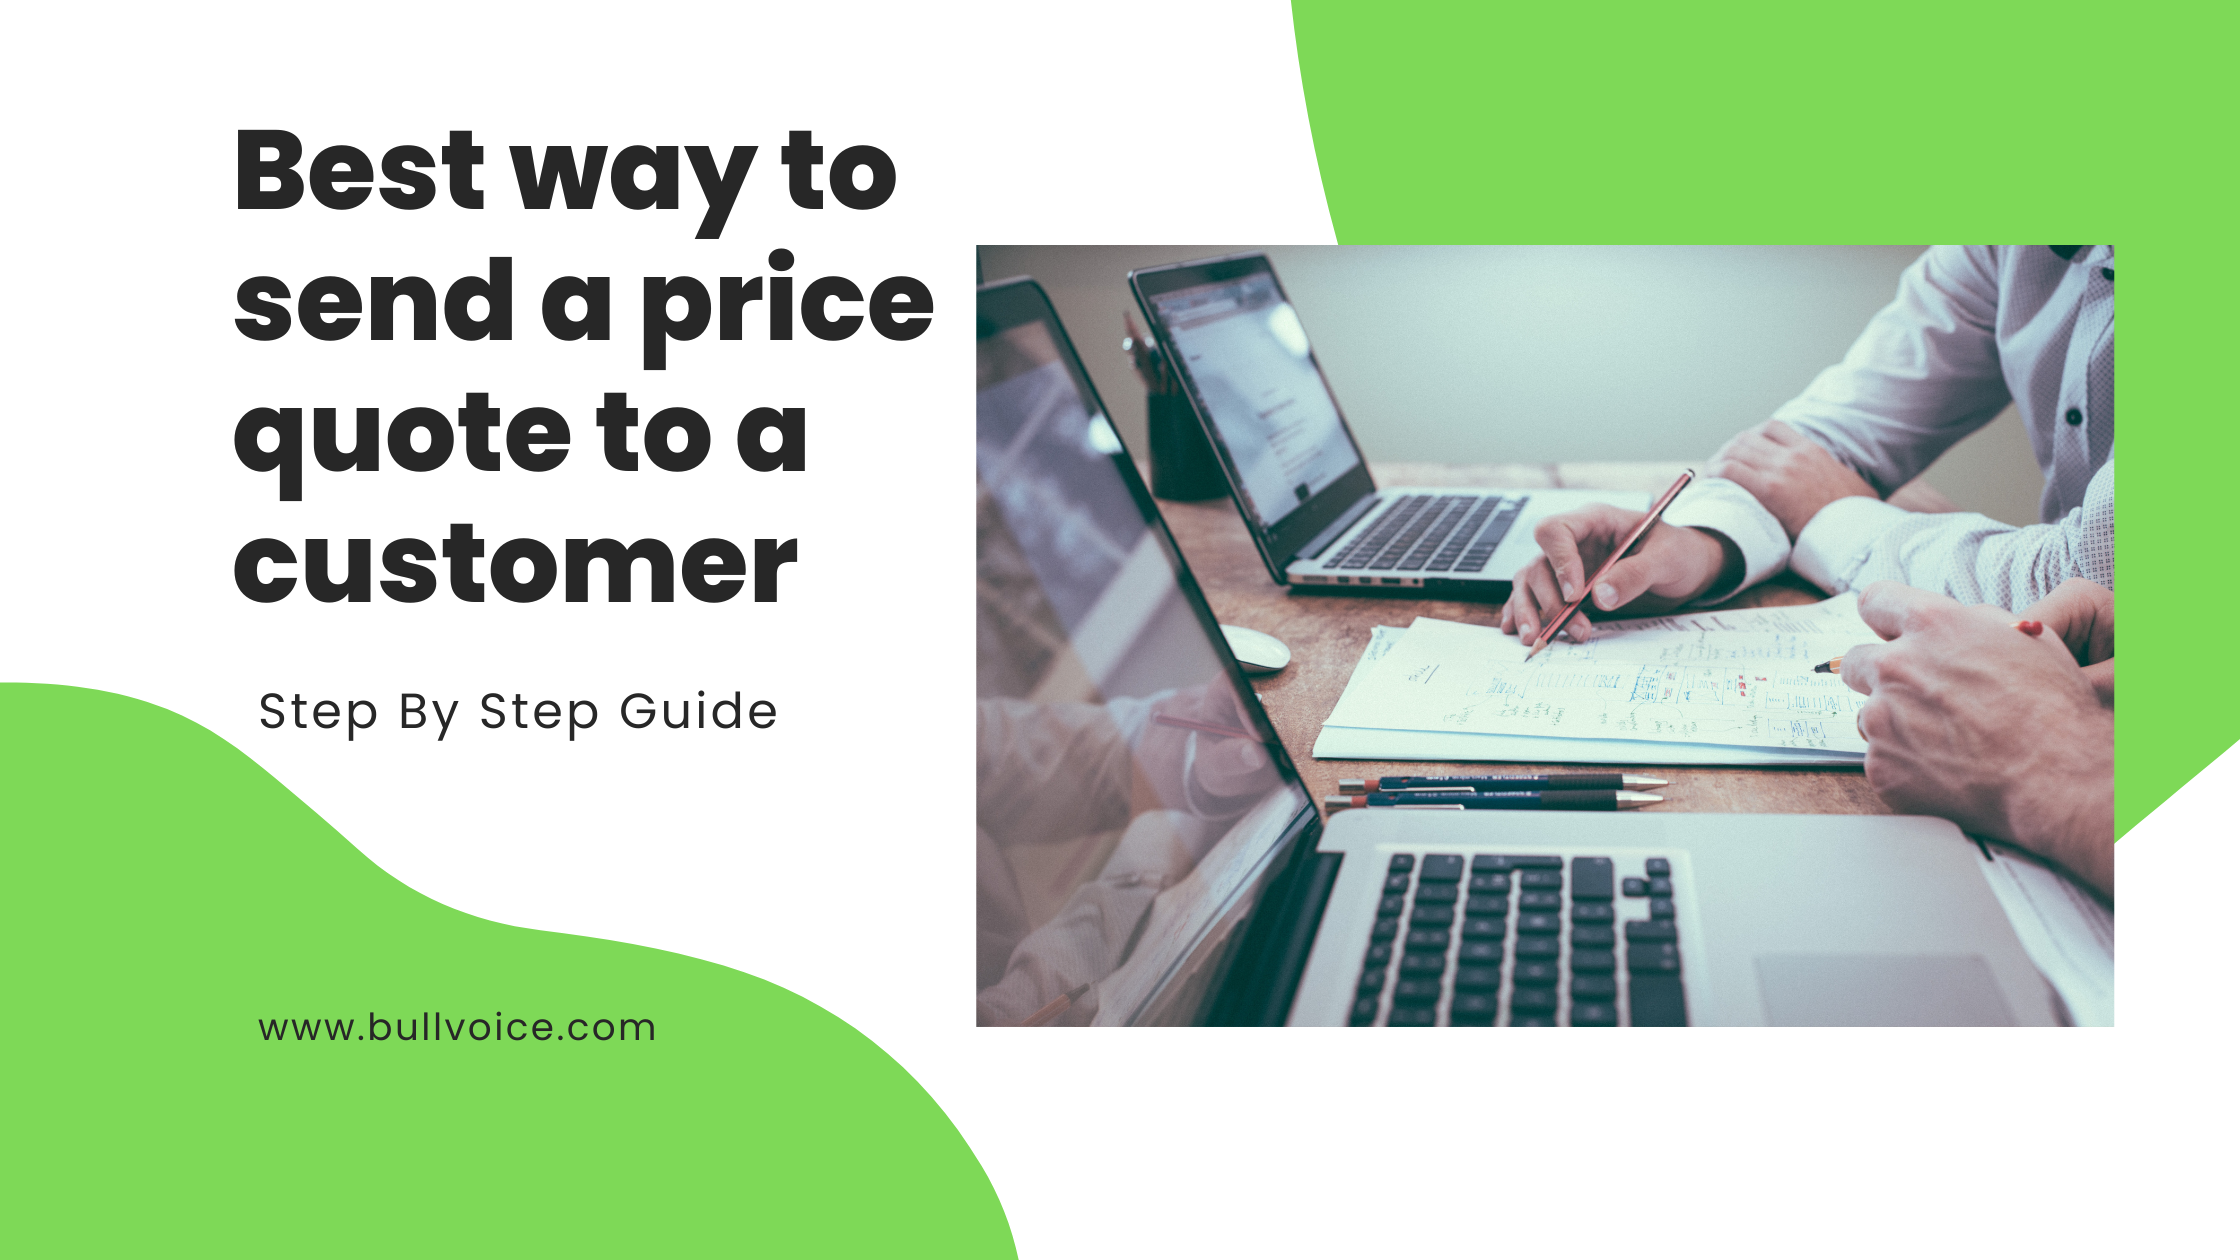 Best way to send a price quote to a customer